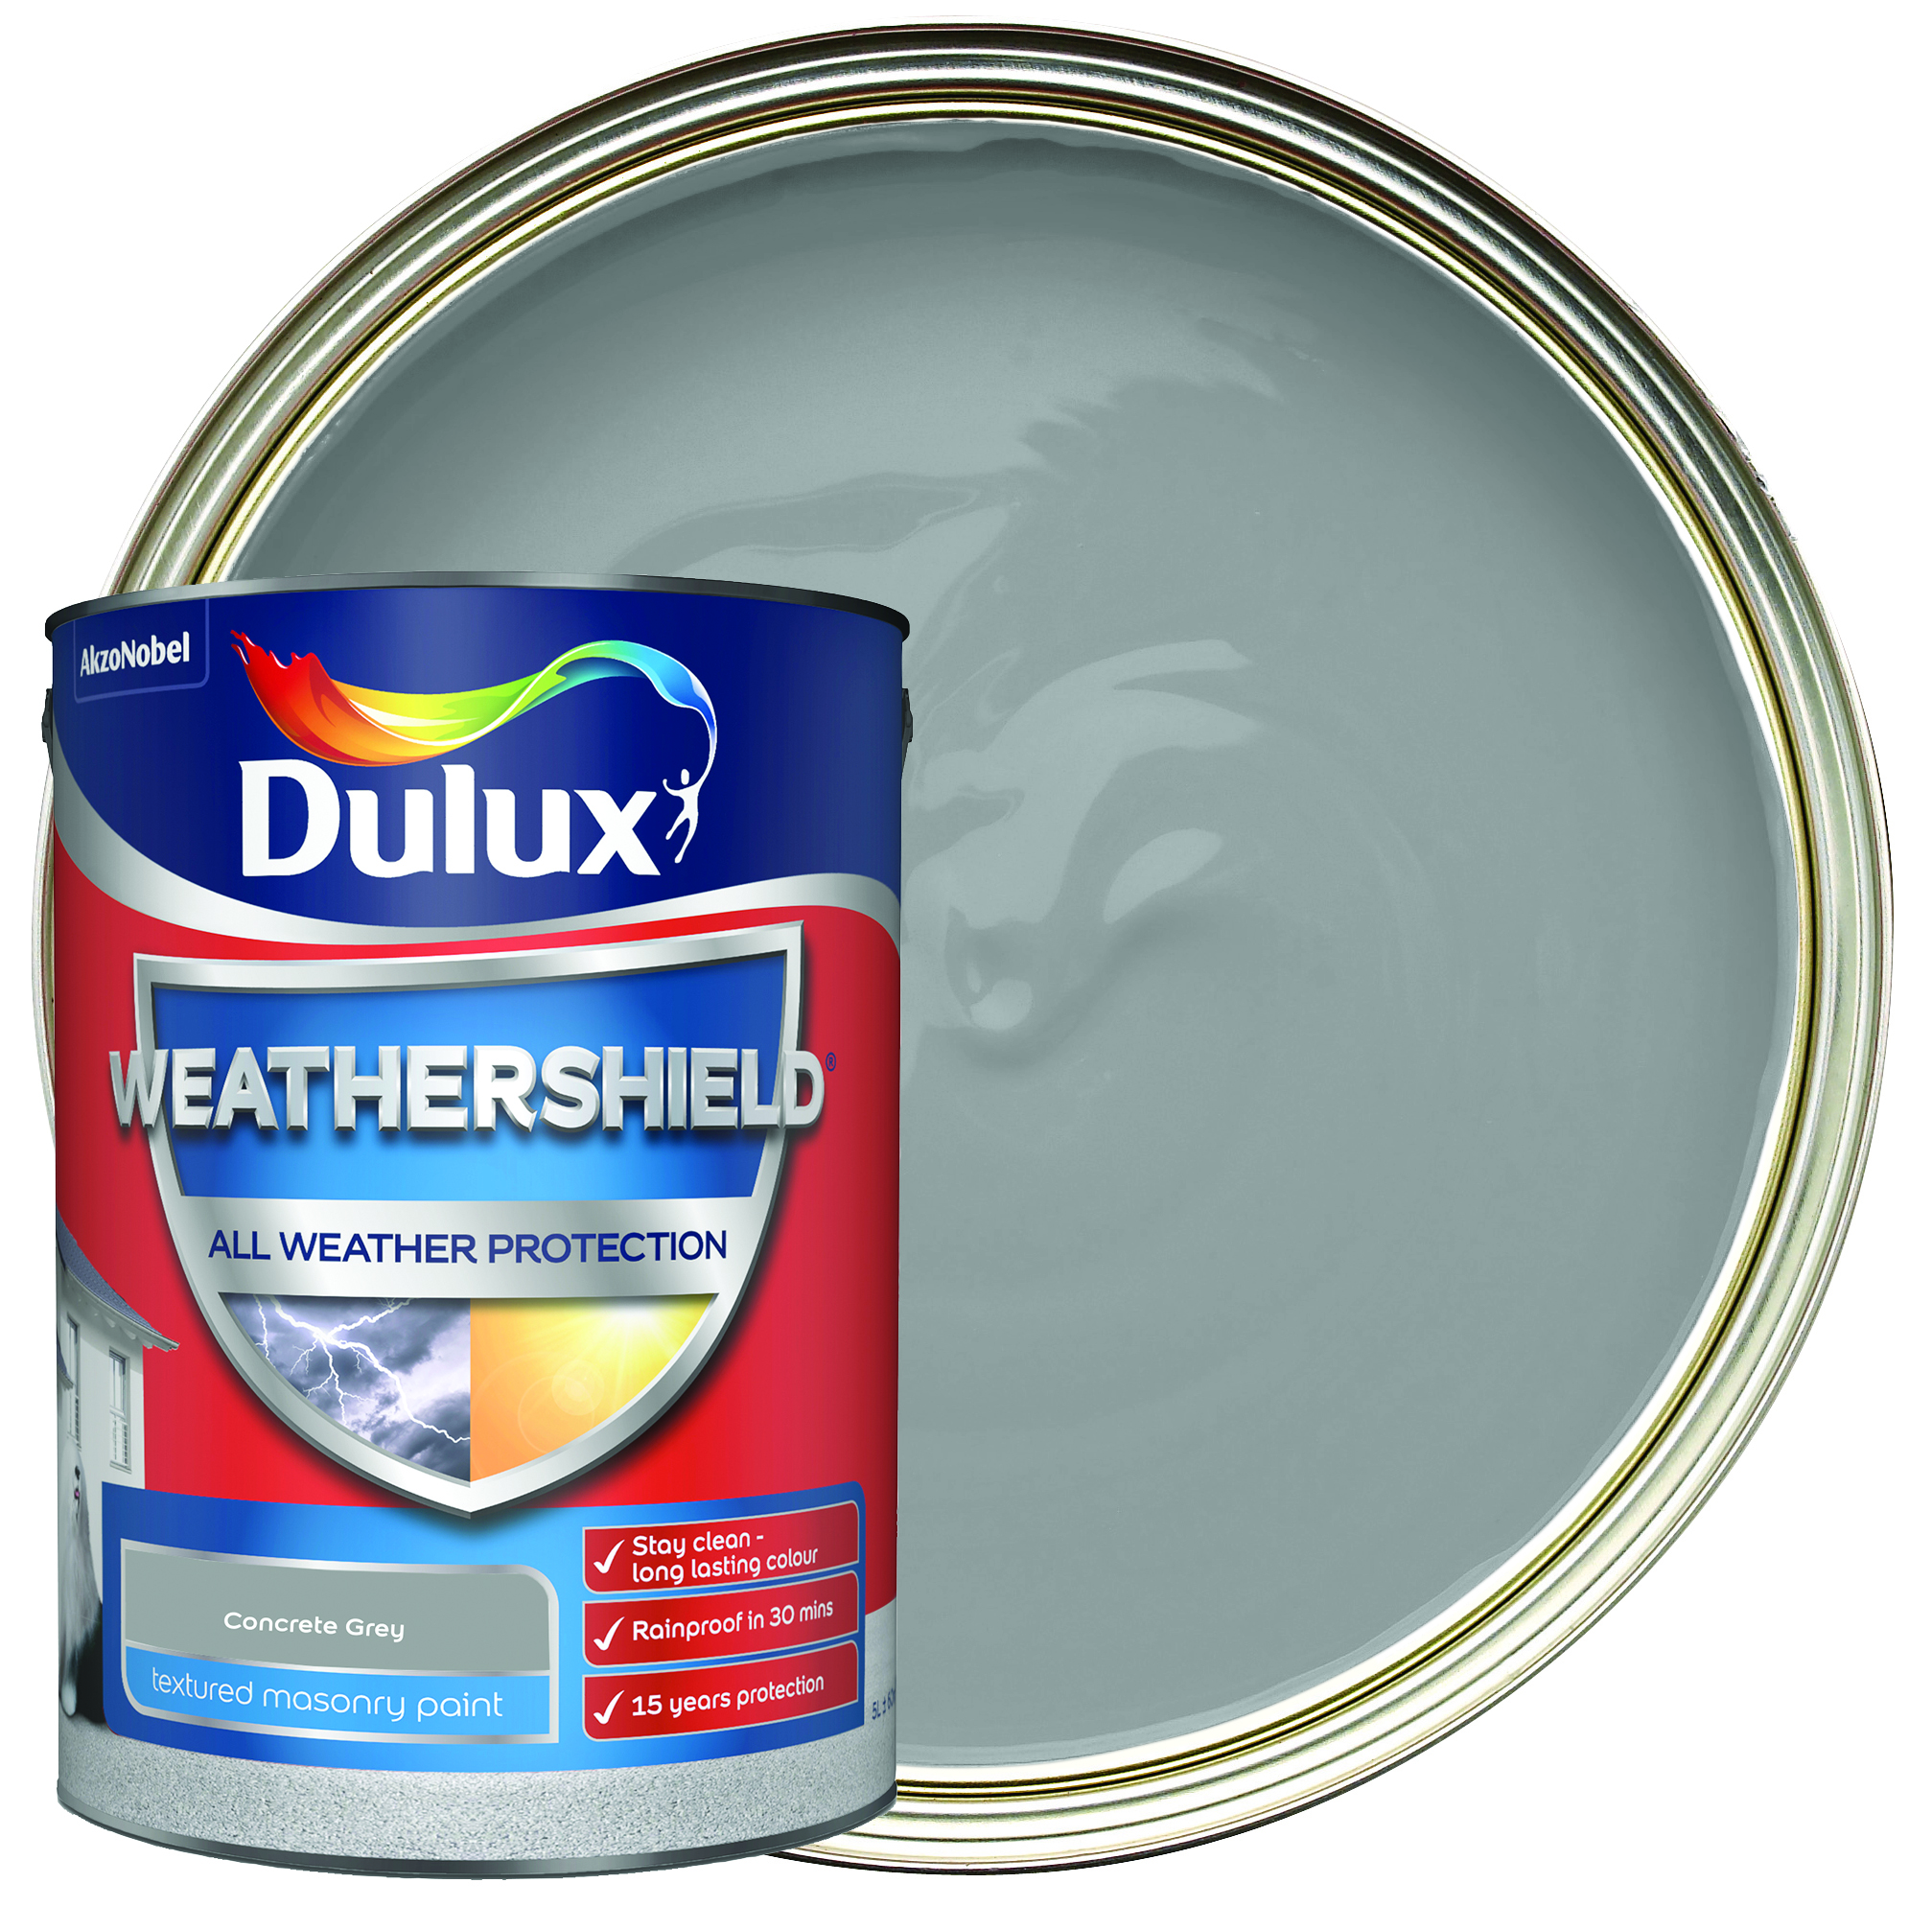 Image of Dulux Weathershield All Weather Purpose Textured Paint - Concrete Grey - 5L